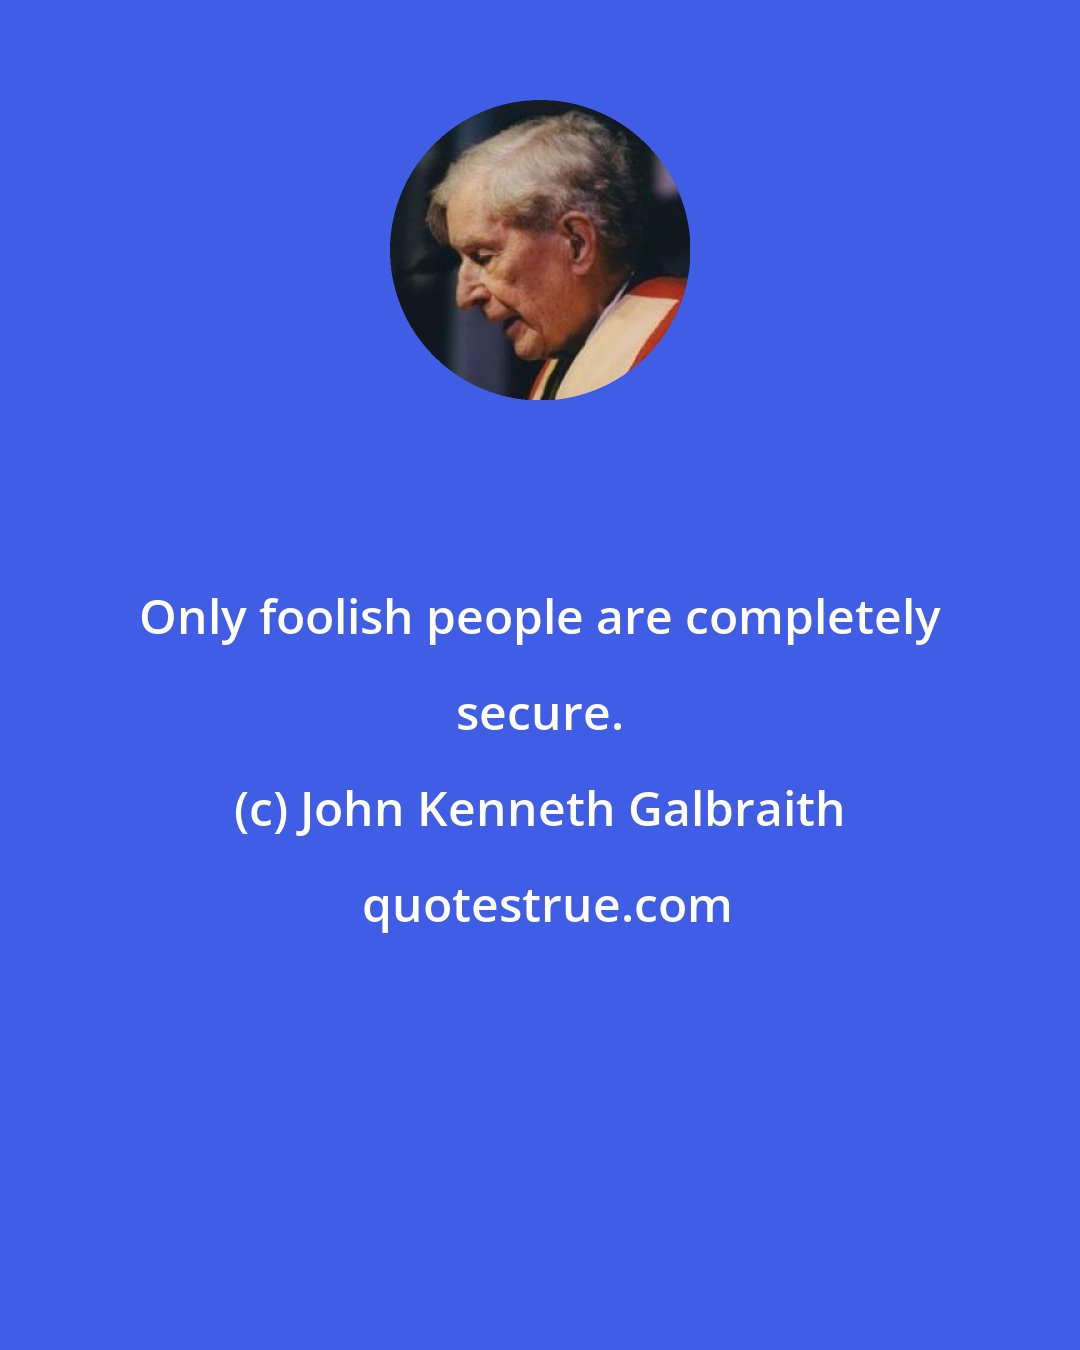 John Kenneth Galbraith: Only foolish people are completely secure.